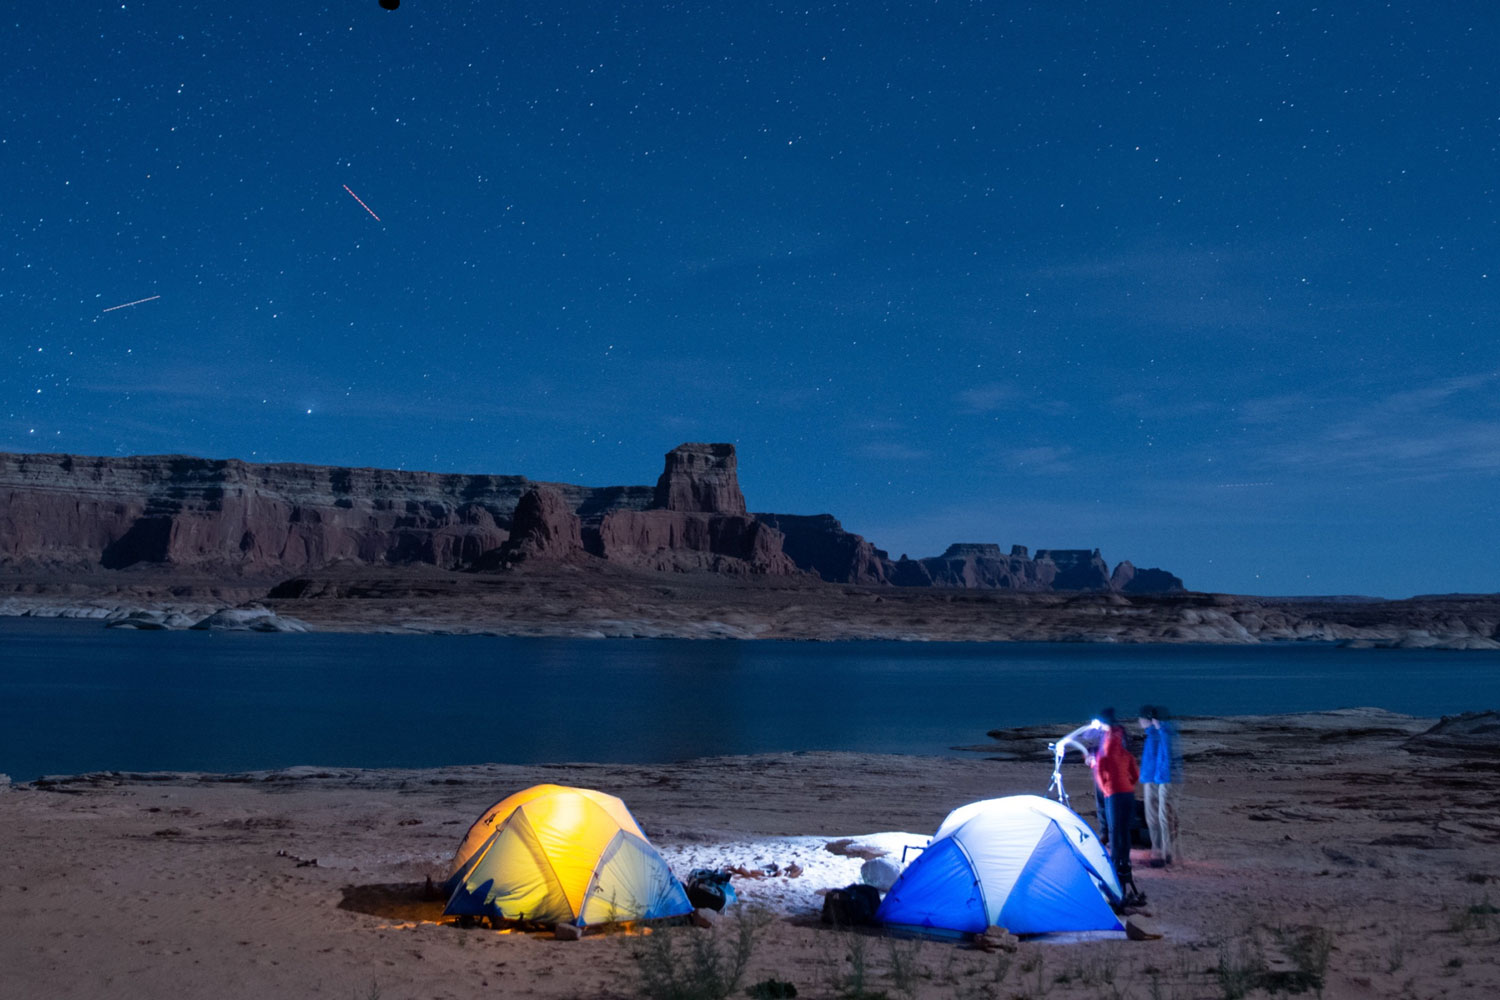 Rent outdoor gear while you're camping with Reserve America and Arrive -  Curbed